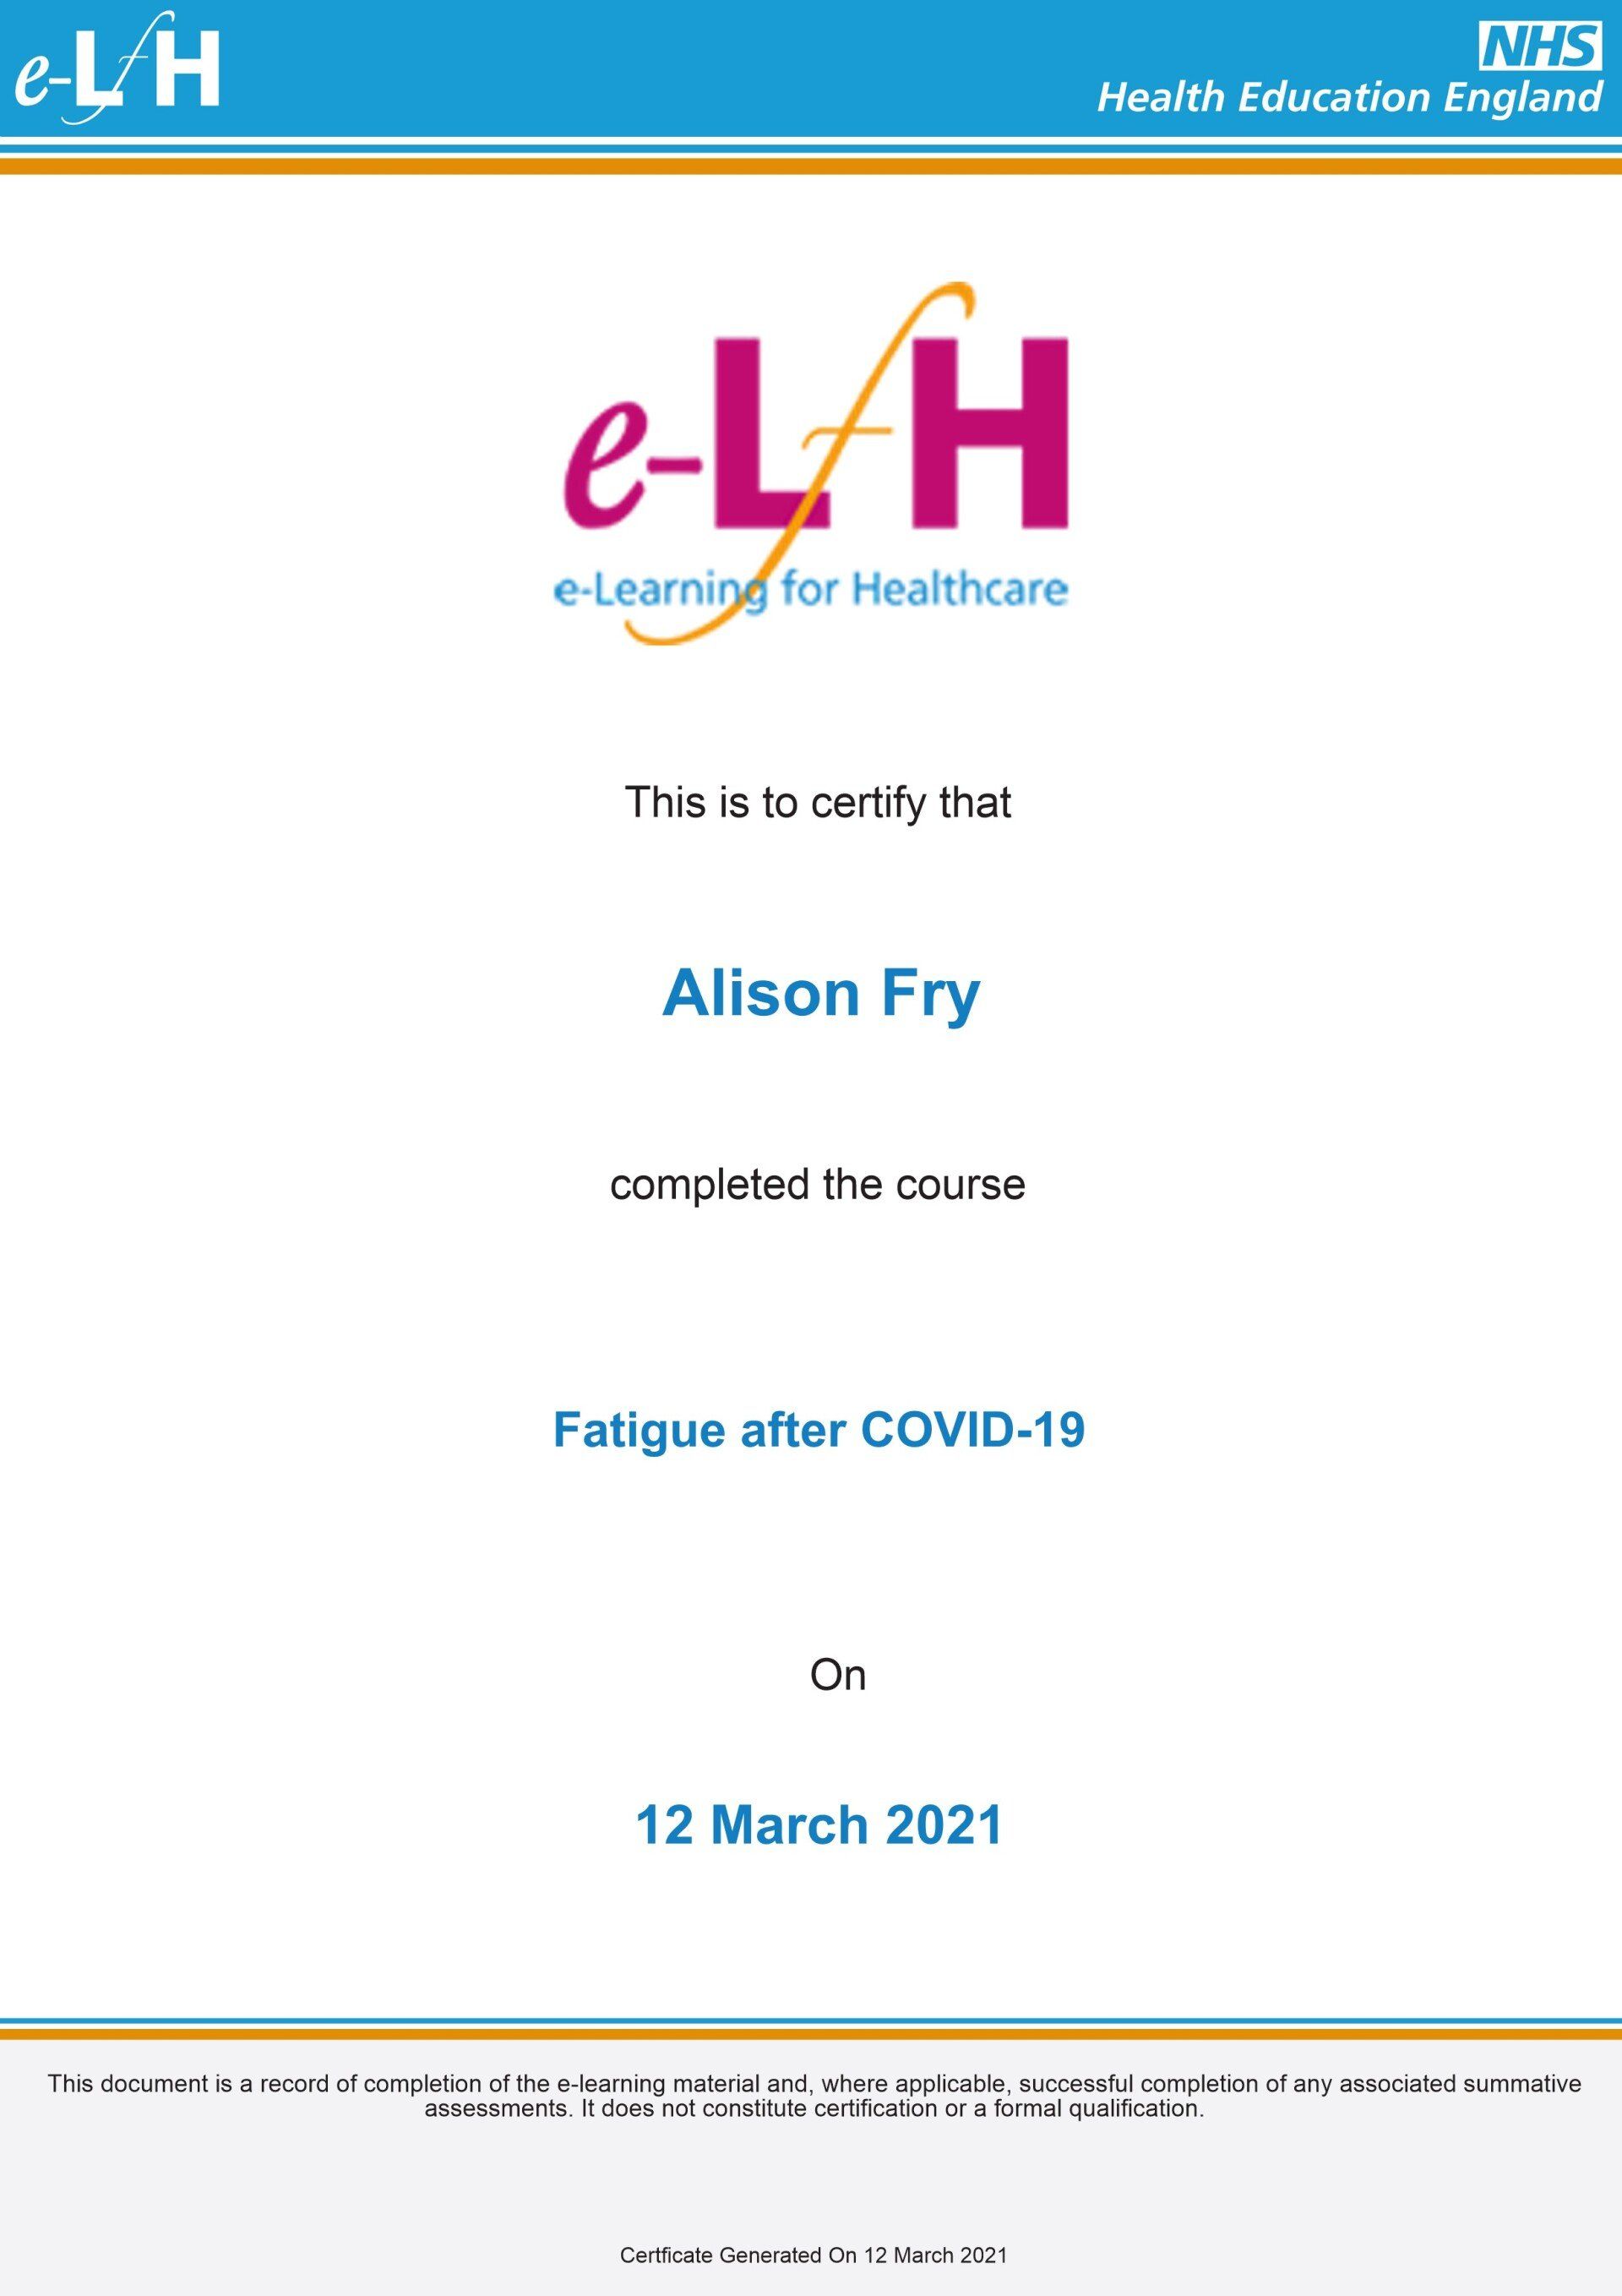 Fatigue after COVID-19 - 12th March 2021